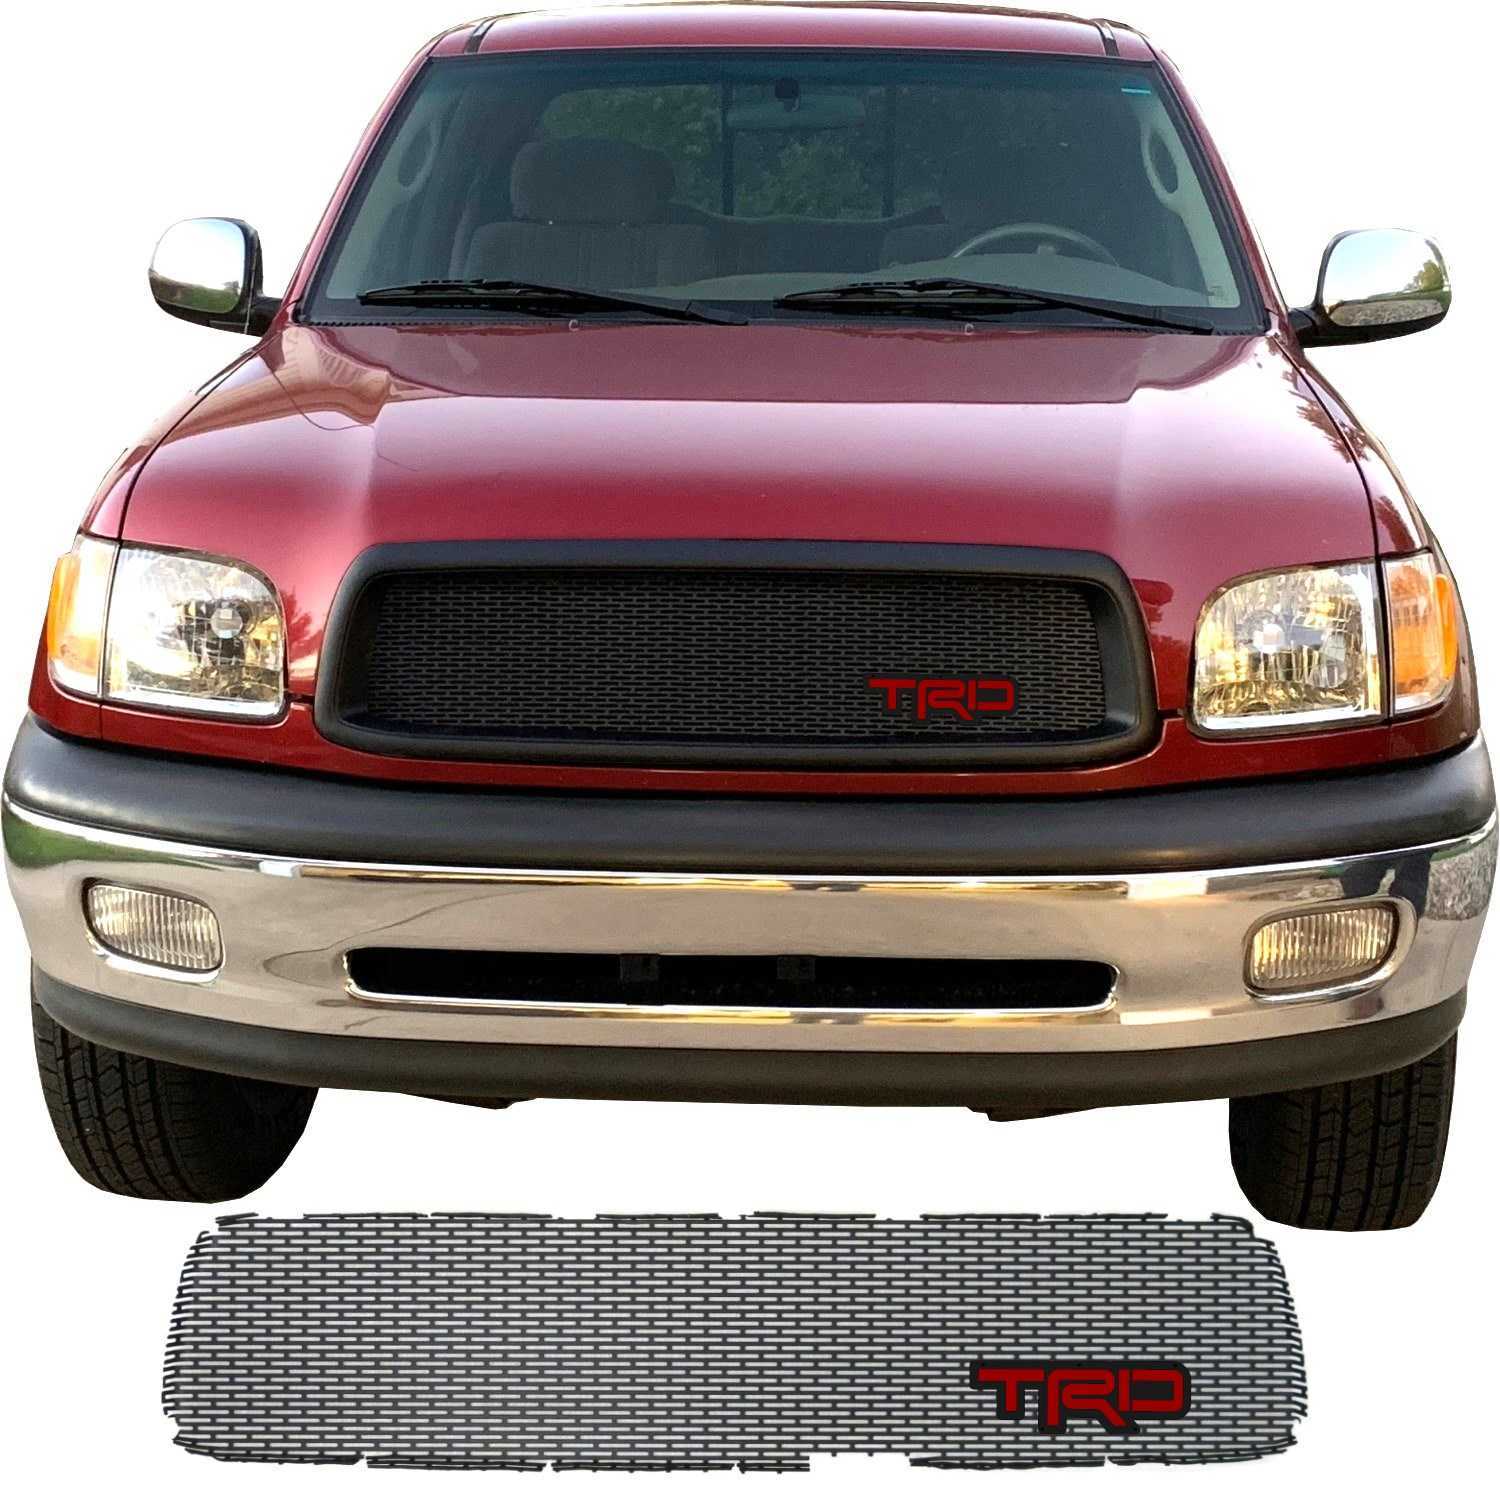 2000 - 2002 Toyota Tundra Grill Mesh with TRD Emblem